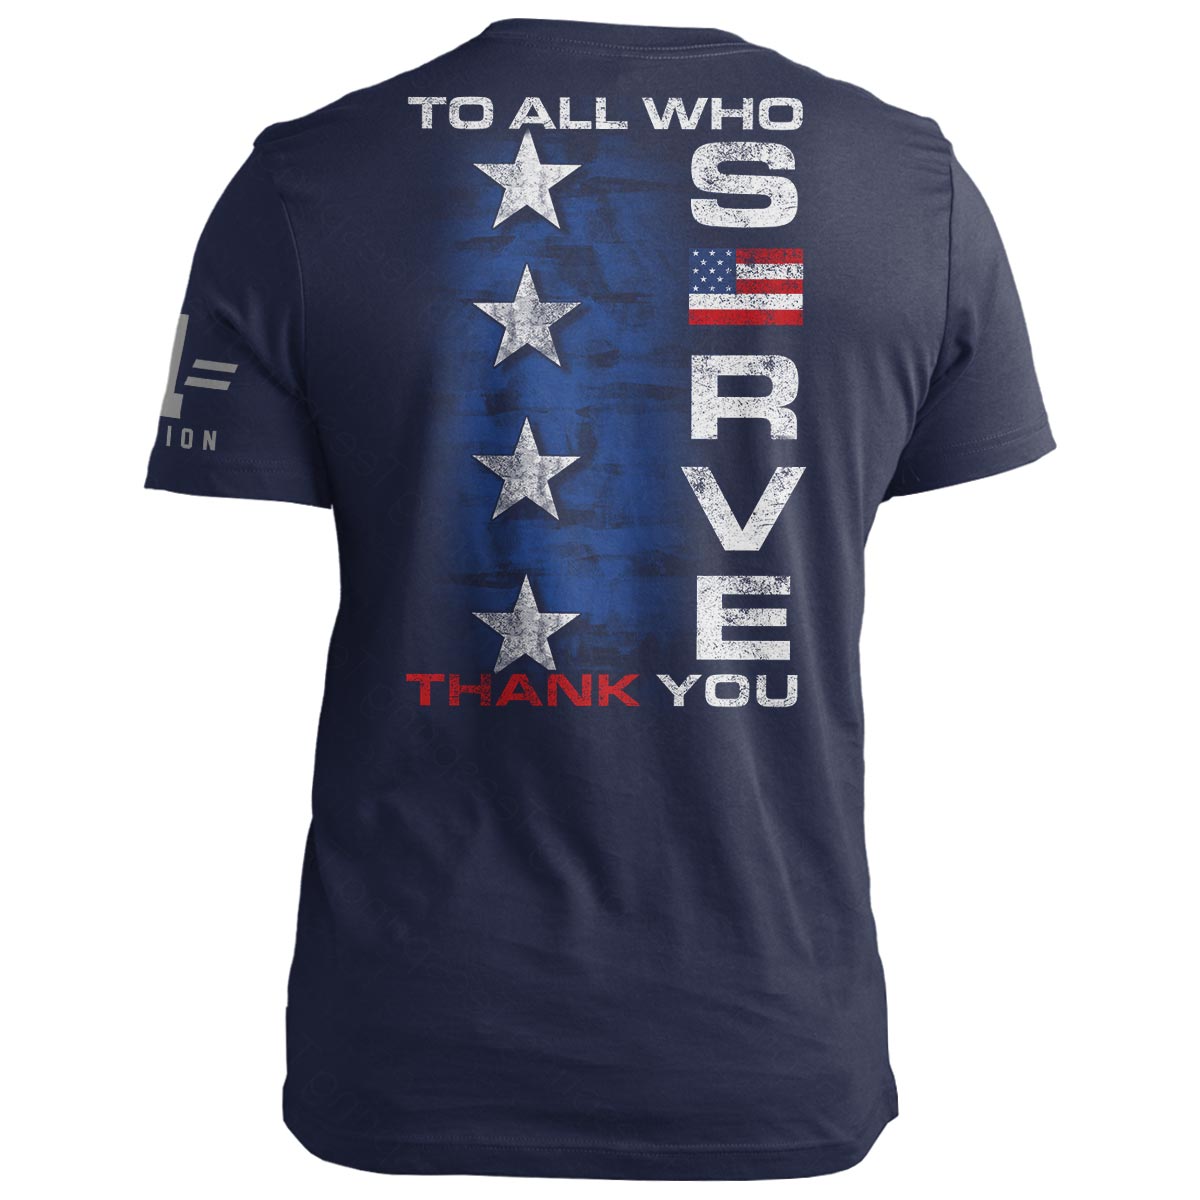 To All Who Serve: THANK YOU